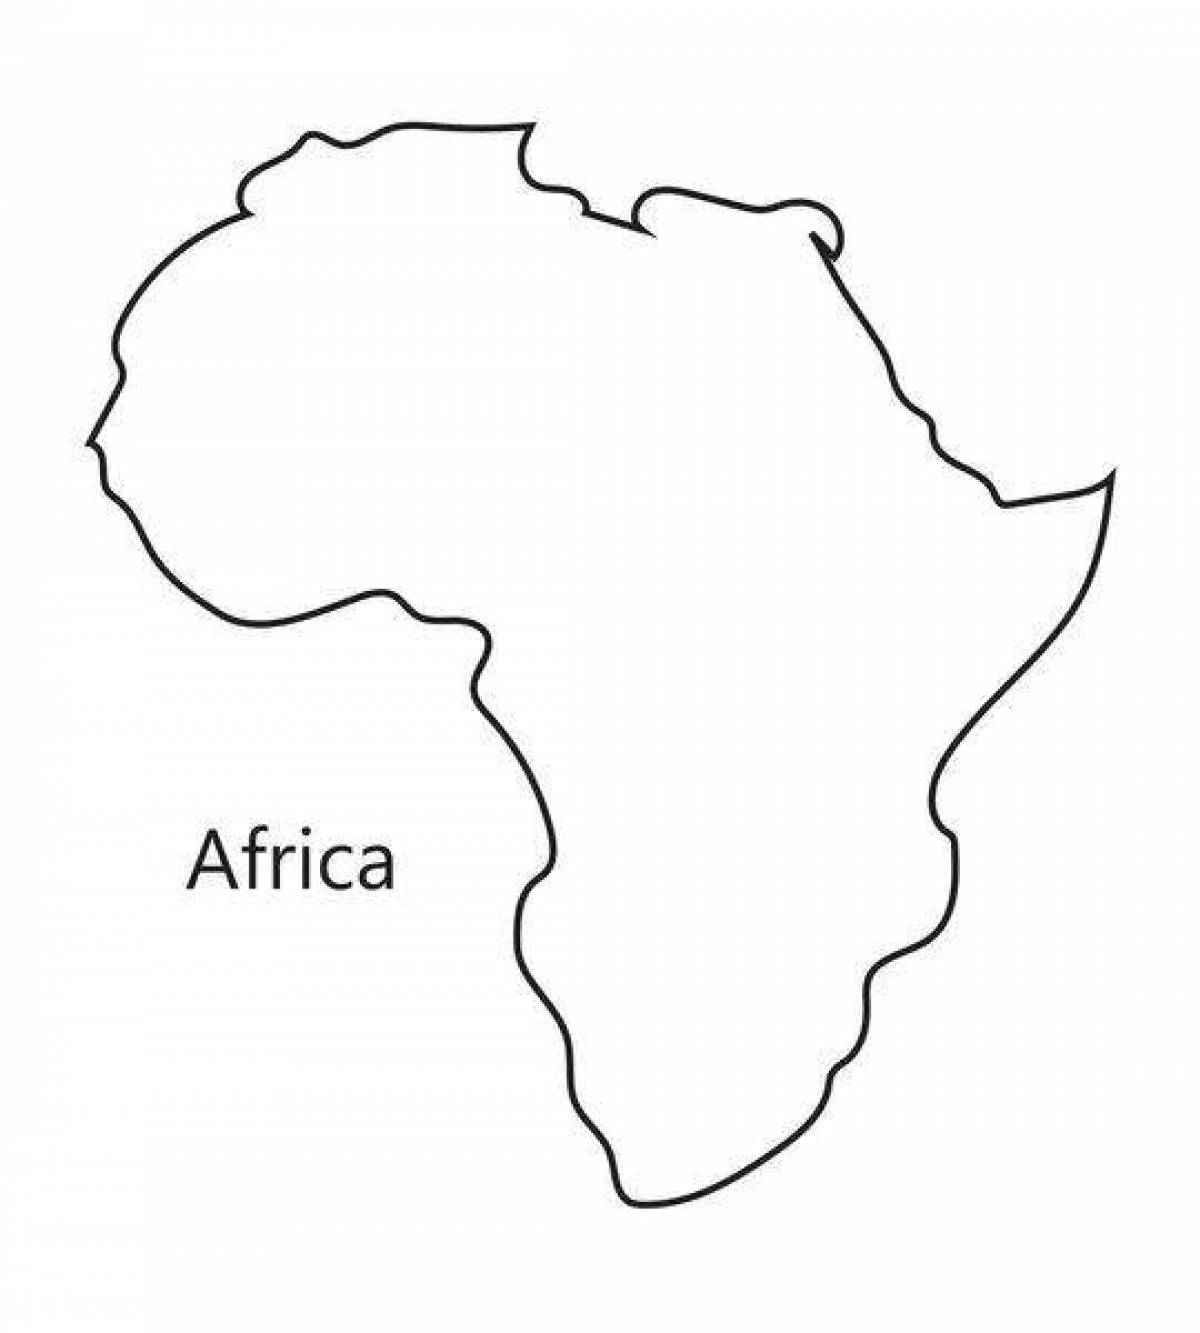 Colouring amazing map of africa